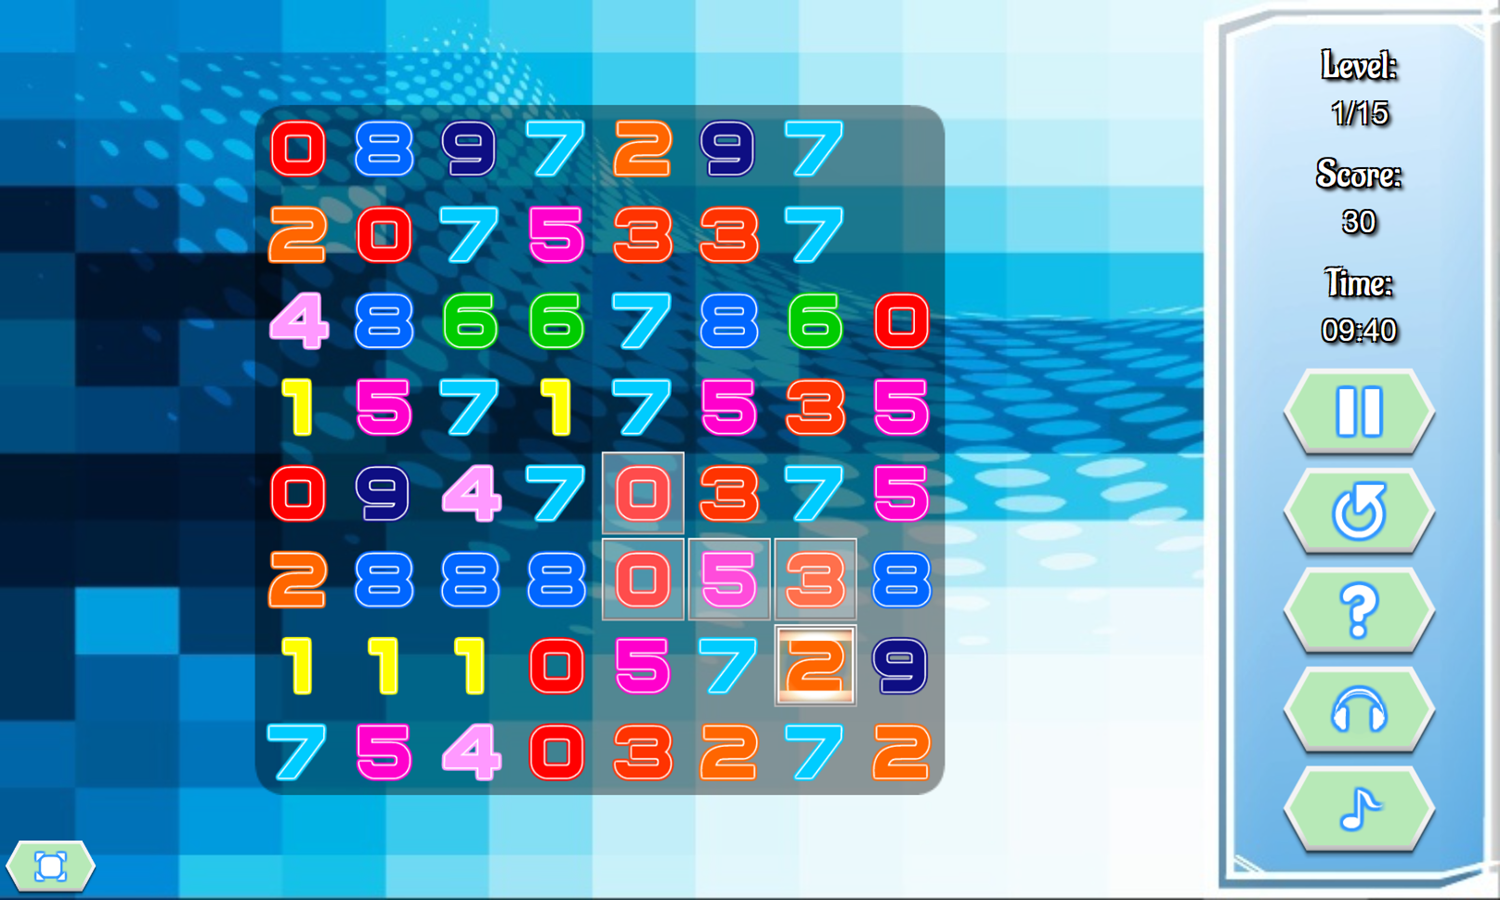 Connect 10 Game Play Screenshot.